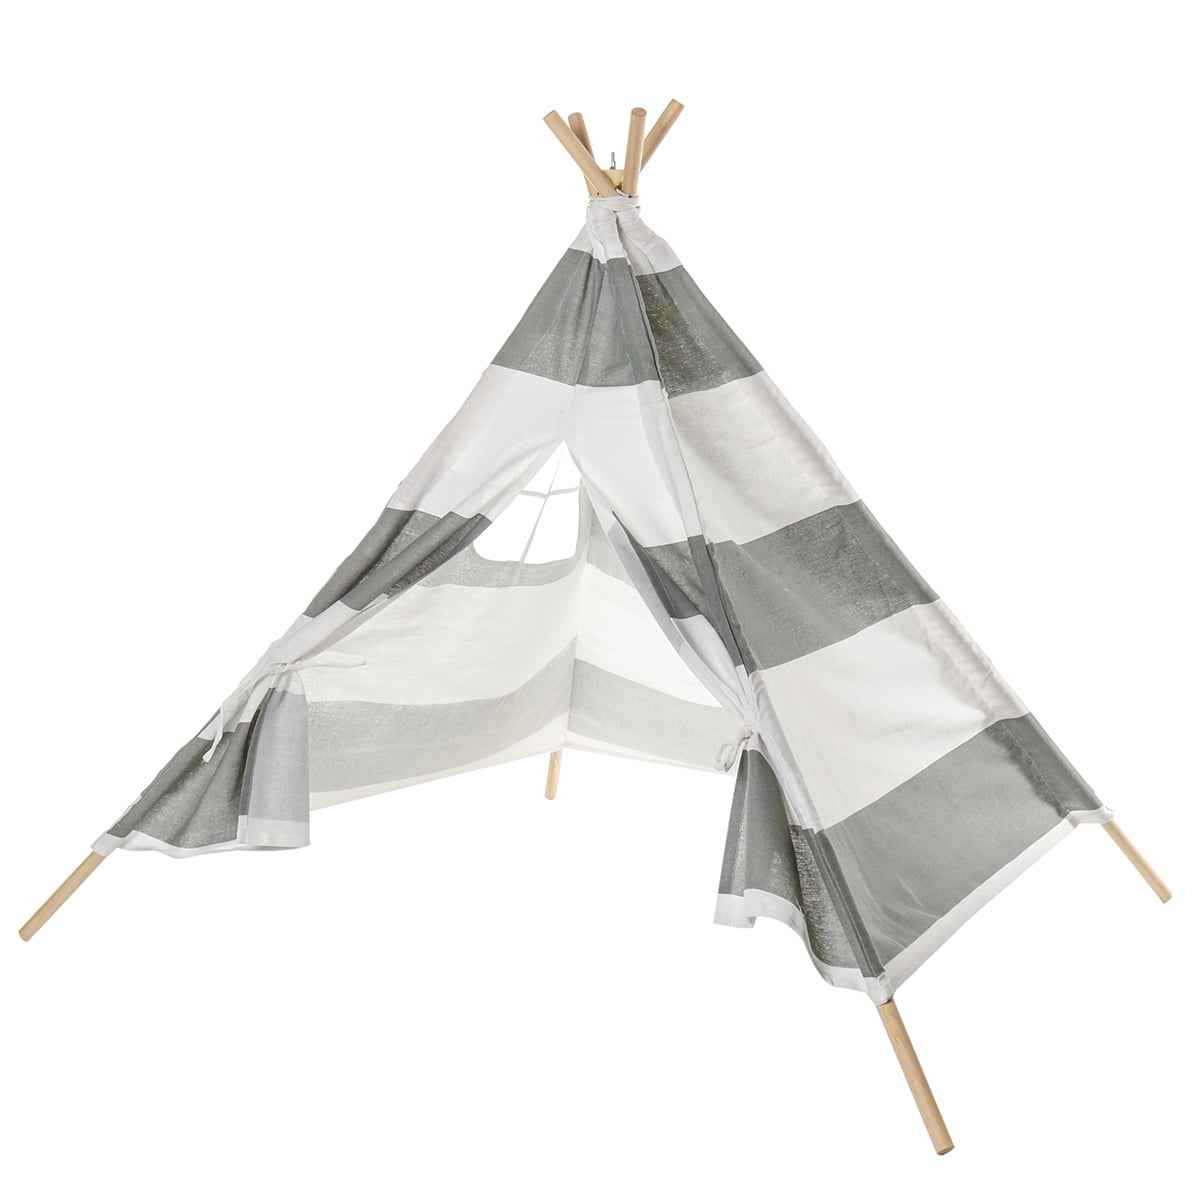 Large Playhouse Sleeping Dome Indian Teepee Tent Children Kids Play Home  T $ 